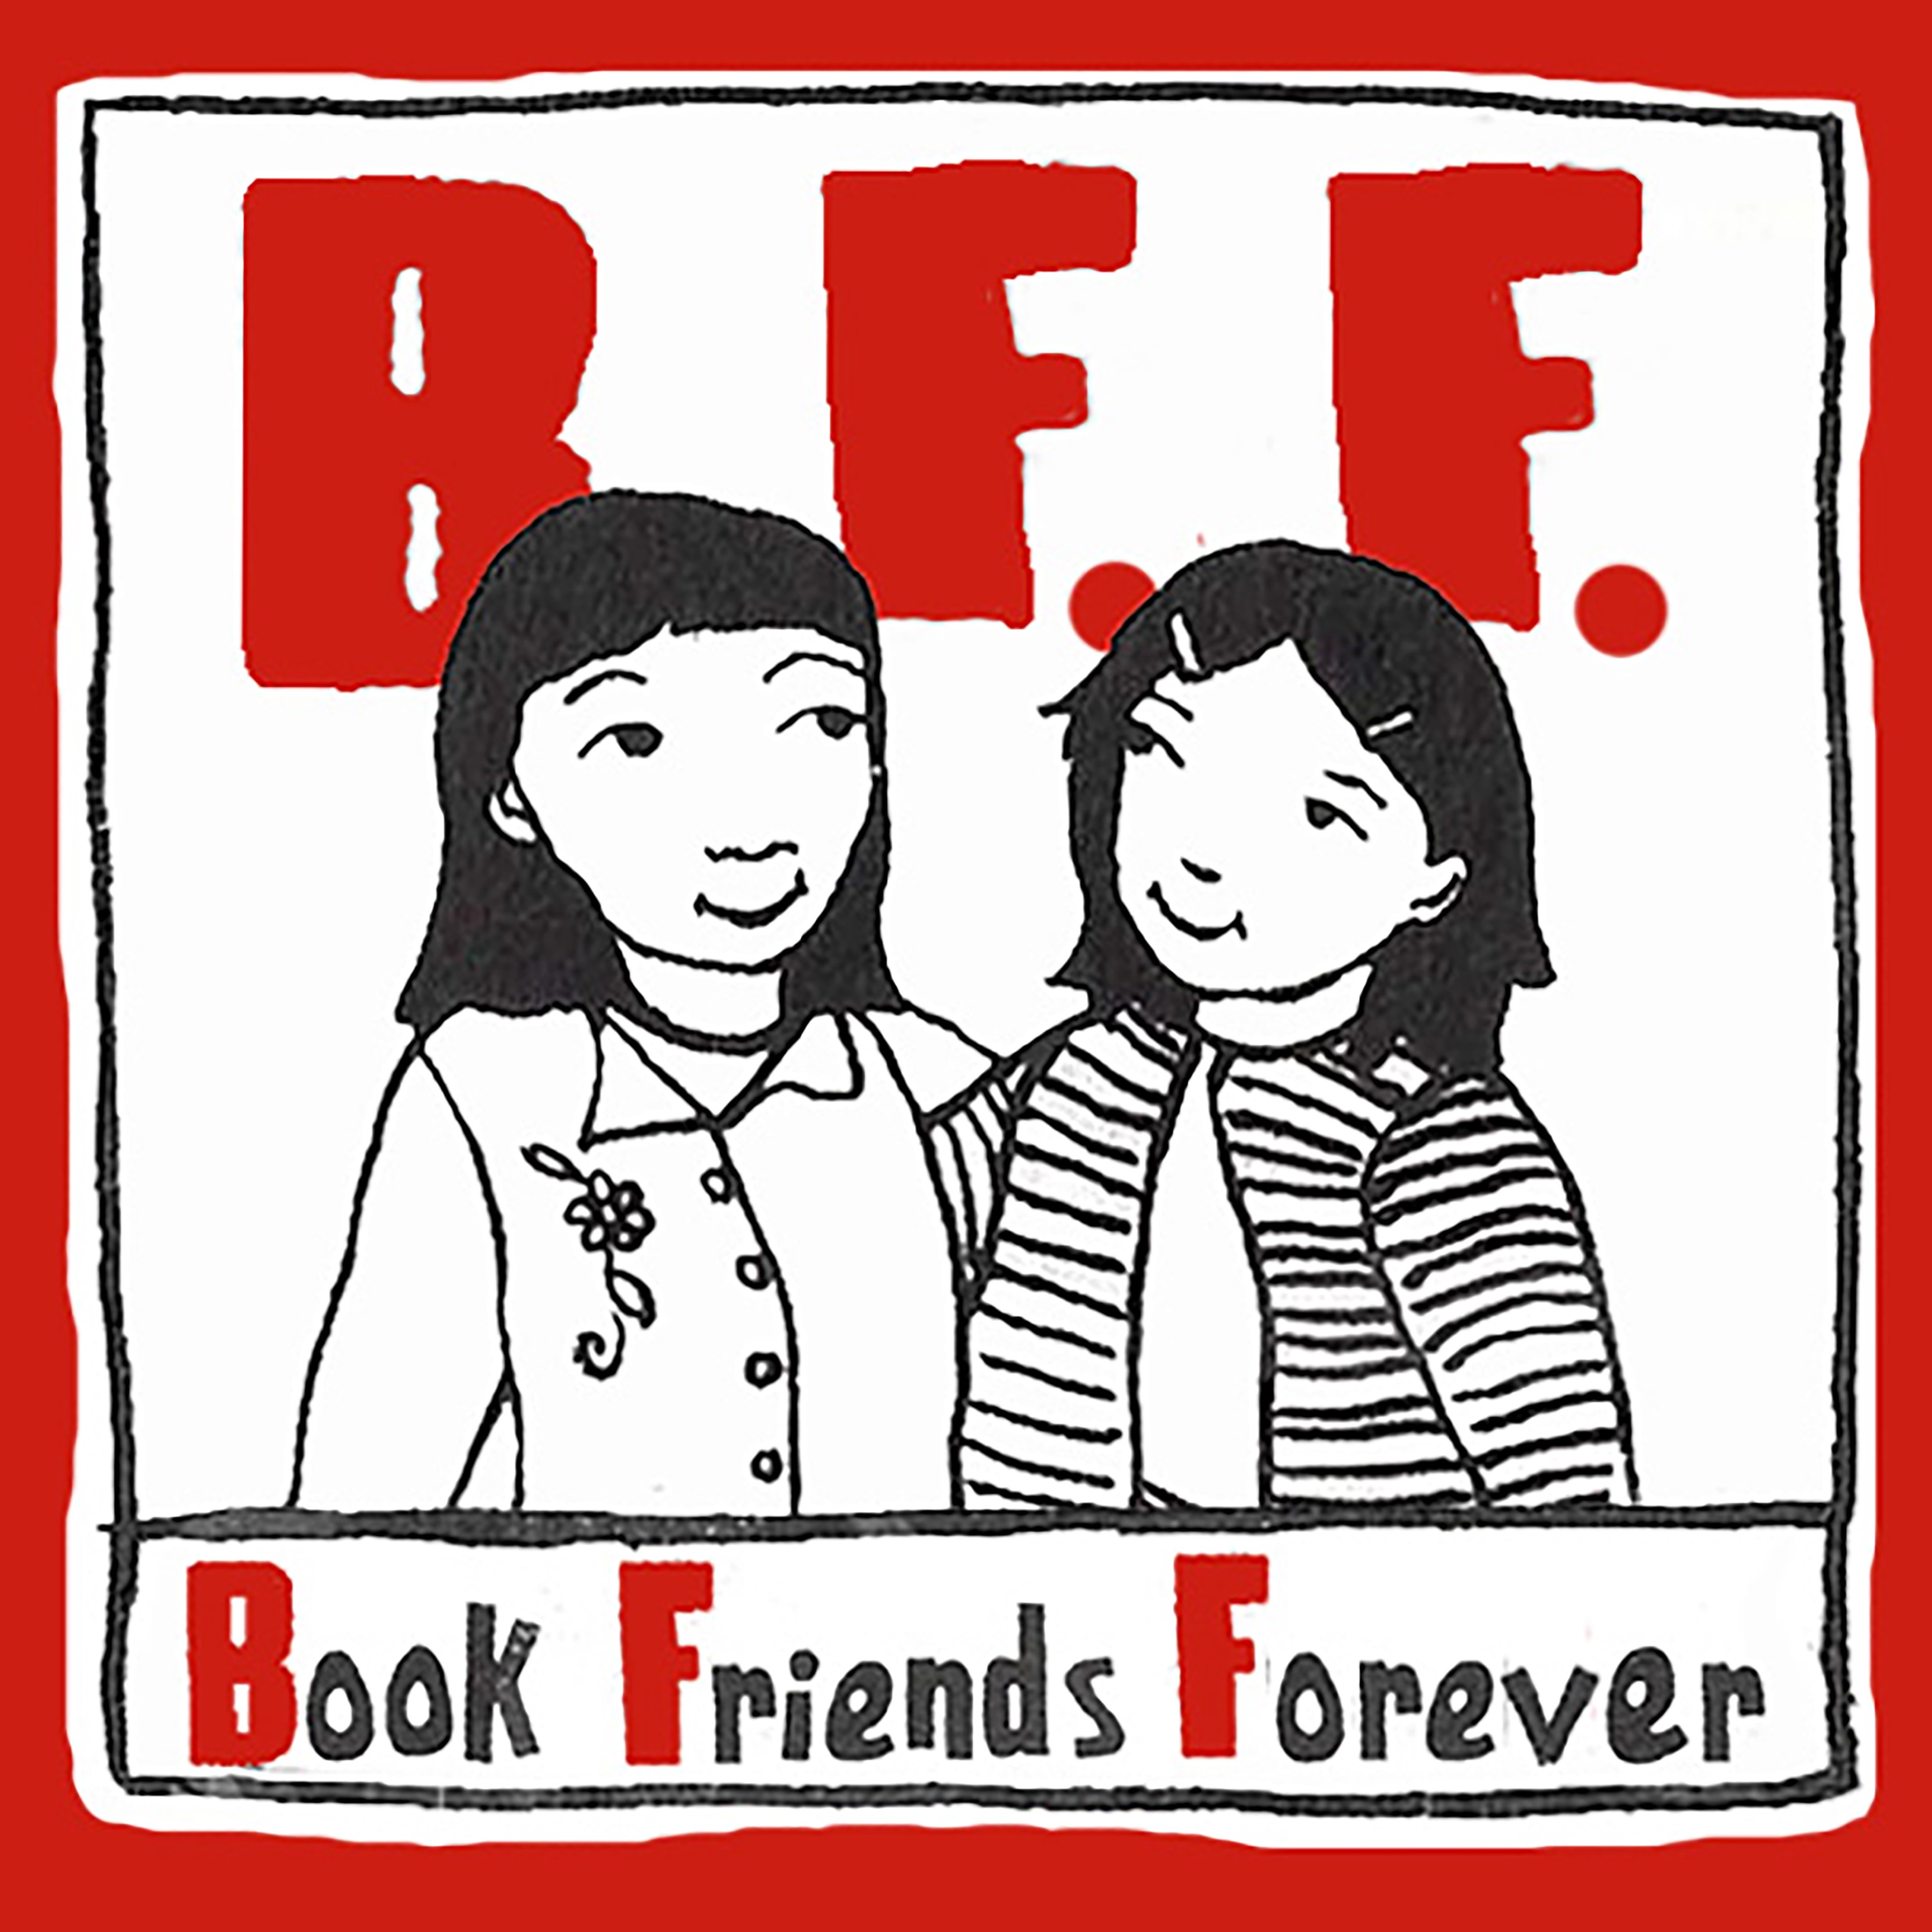 Books and friends. Френдбук. Friendship book. Books are friends. We are friends Forever ГДР.